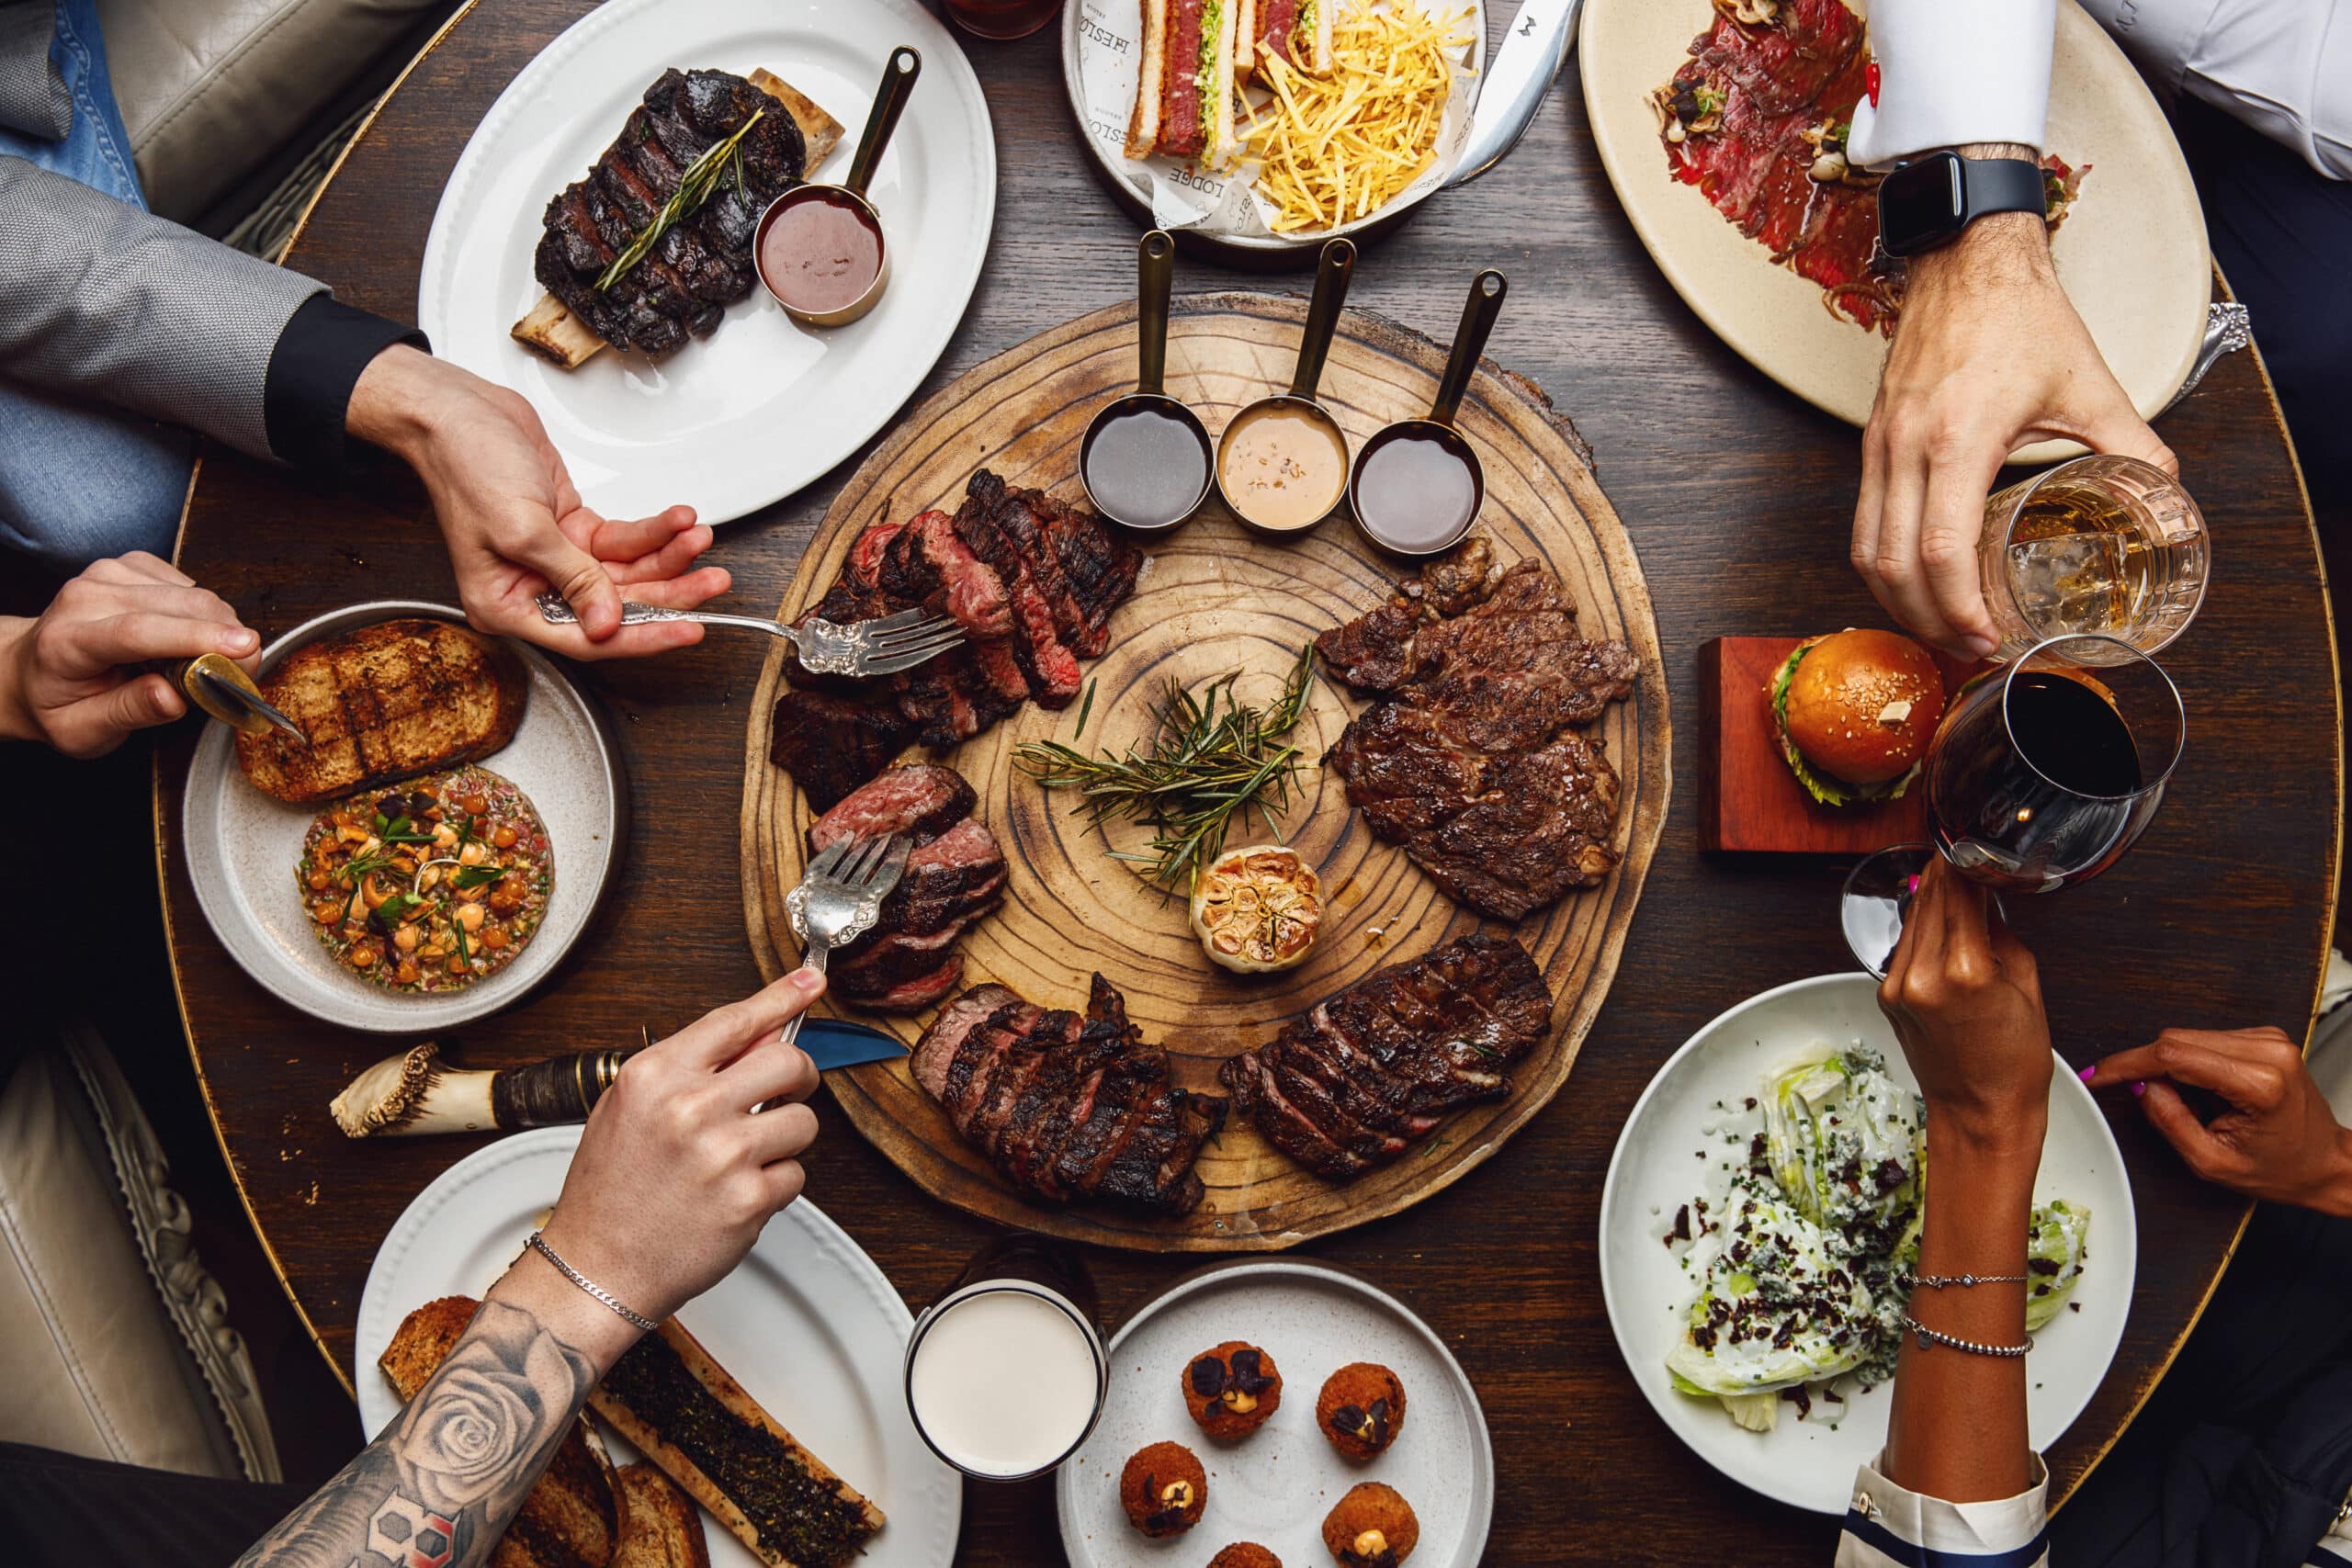 WESLODGE SALOON LAUNCHES ALL YOU CAN M-EAT MENU - Hotel News ME